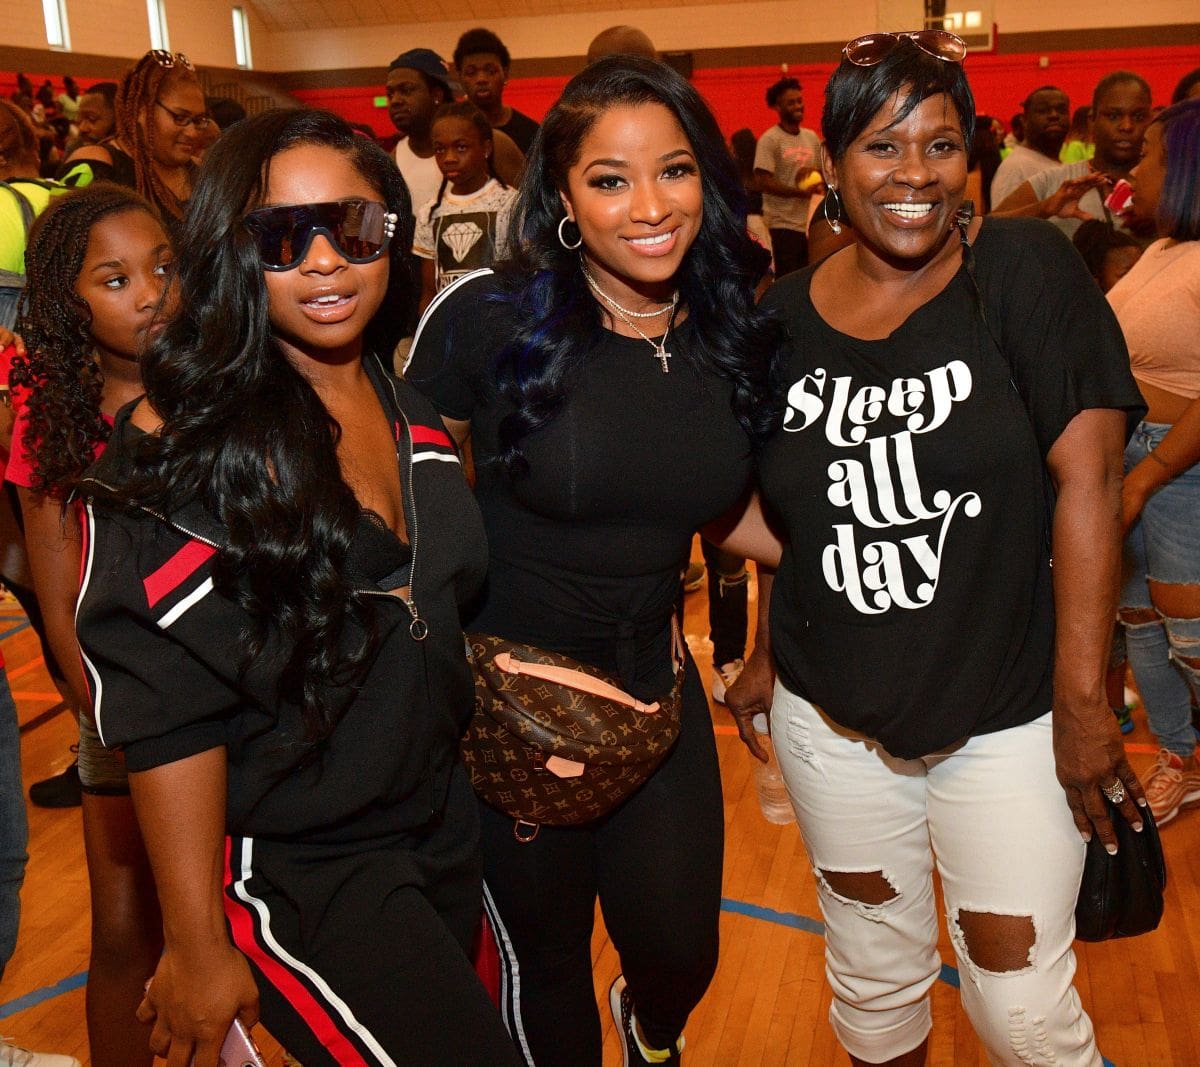 Toya Wright's Latest Photo With Her Daughters And Mom Has Fans Gushing Over Nita - Check It Out Here